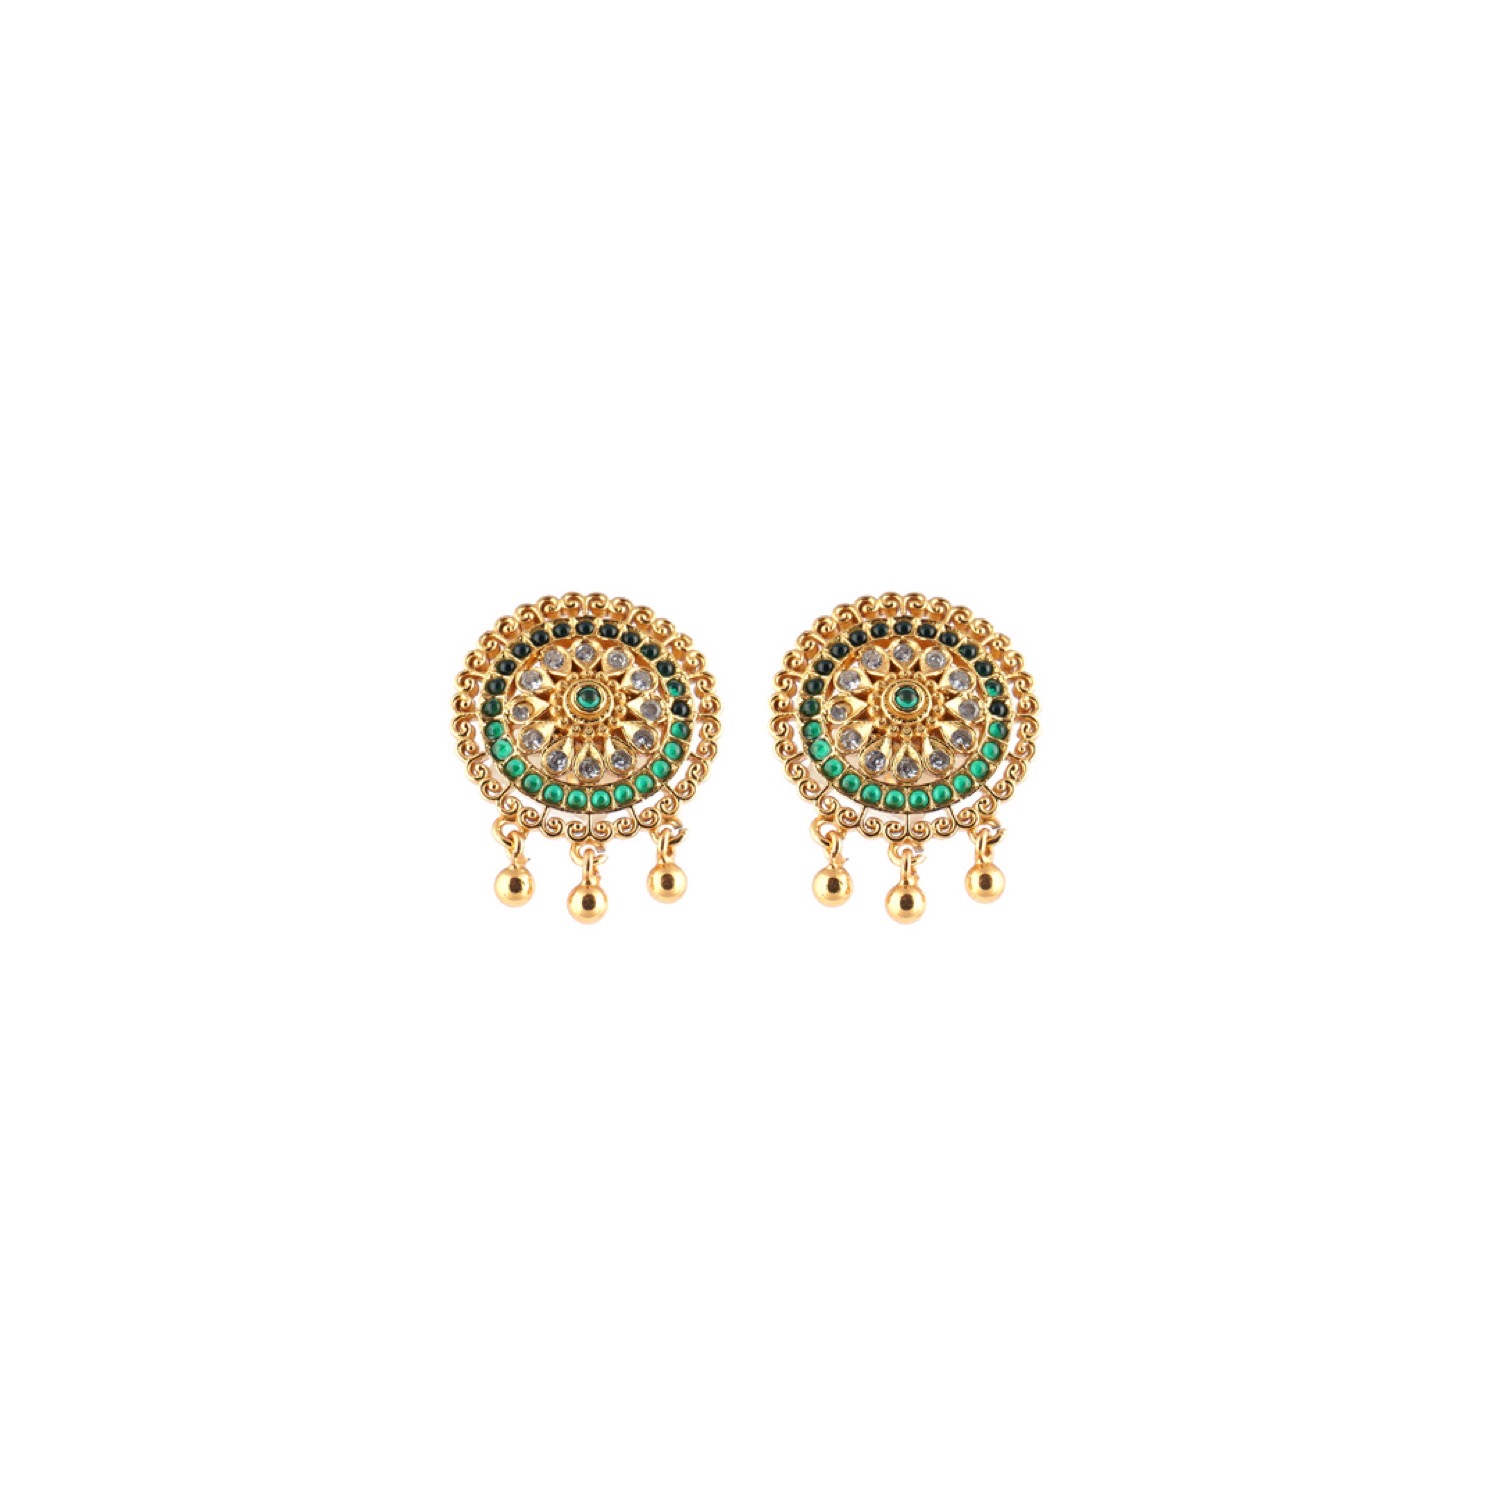 varam_earrings_102022_green_and_white_stone_gold_coated_round_shaped_silver_earrings-1